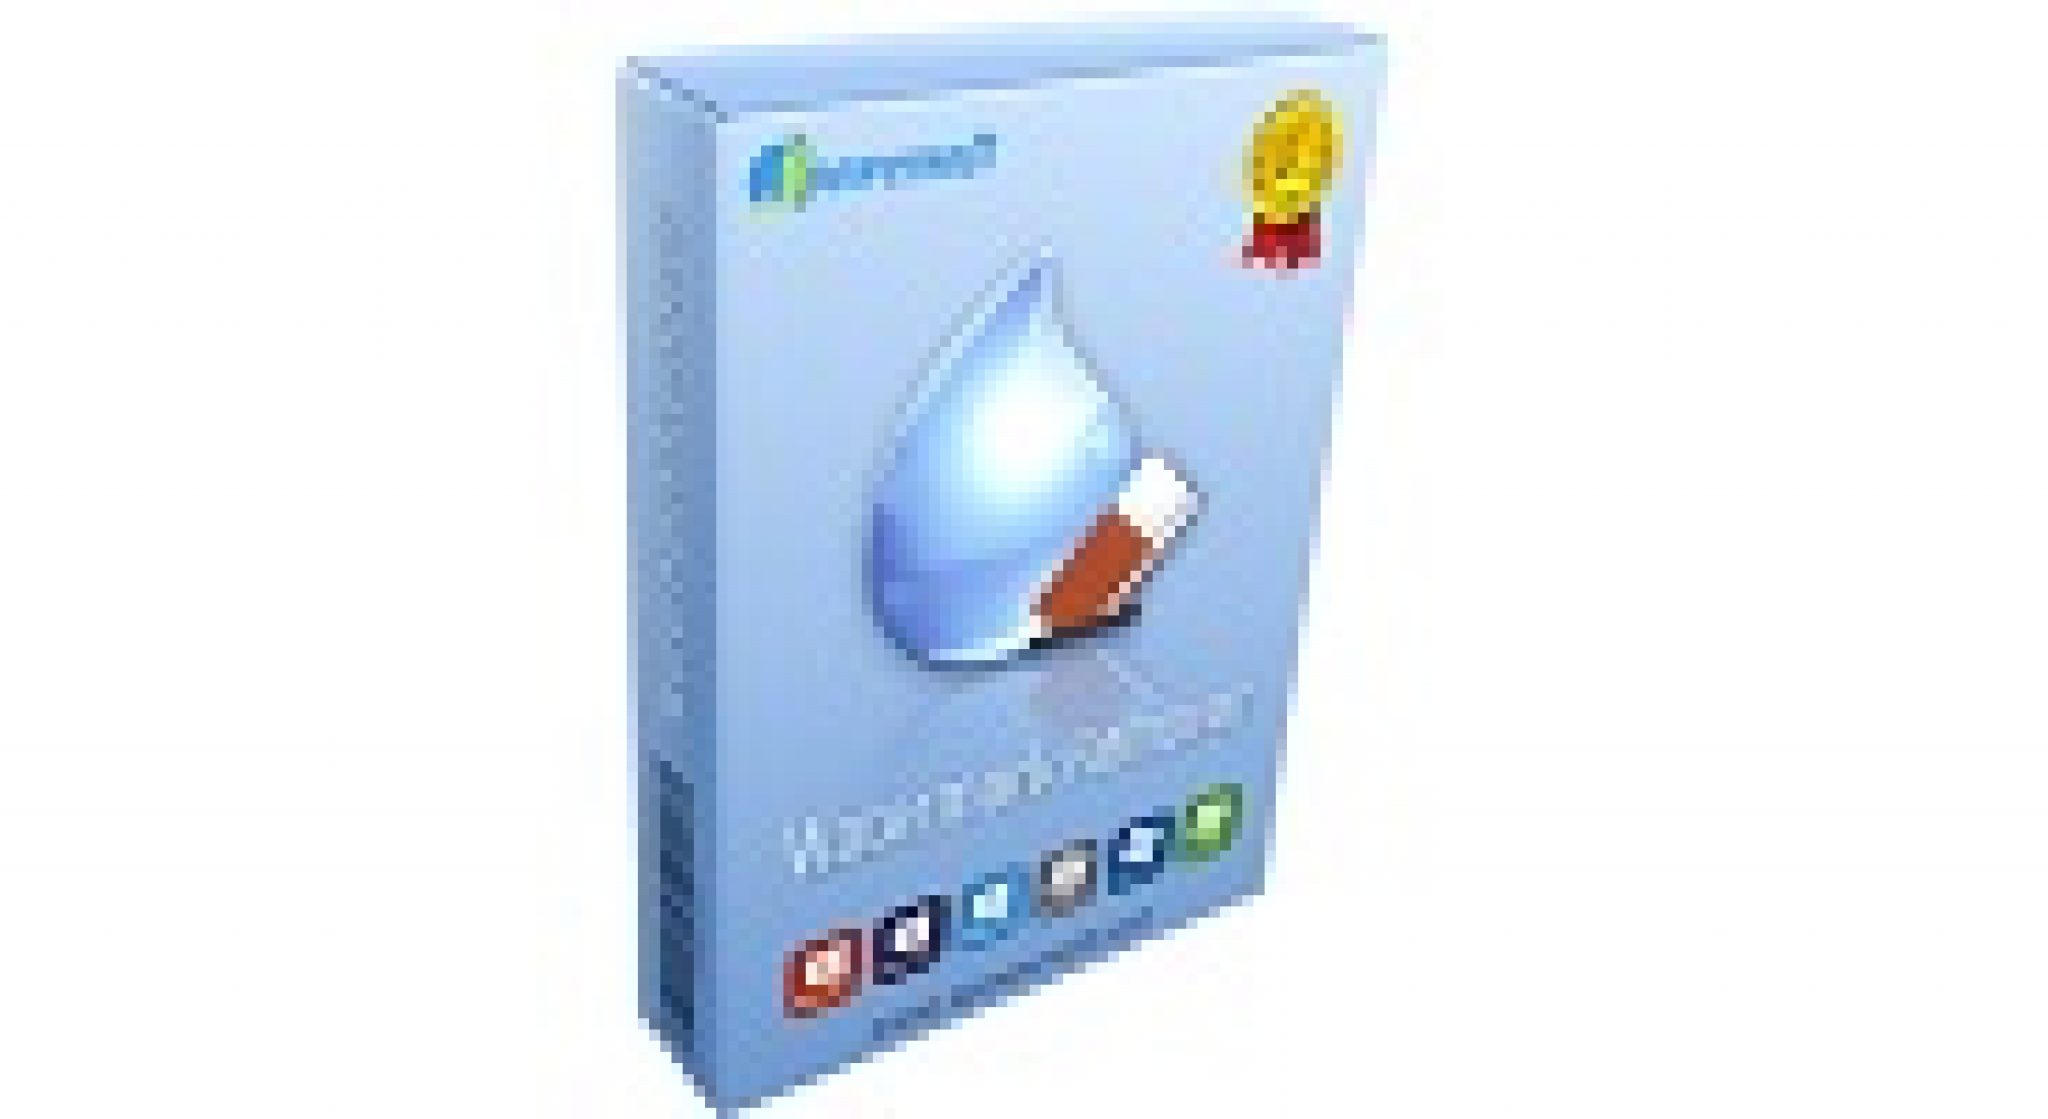 for apple download Apowersoft Watermark Remover 1.4.19.1